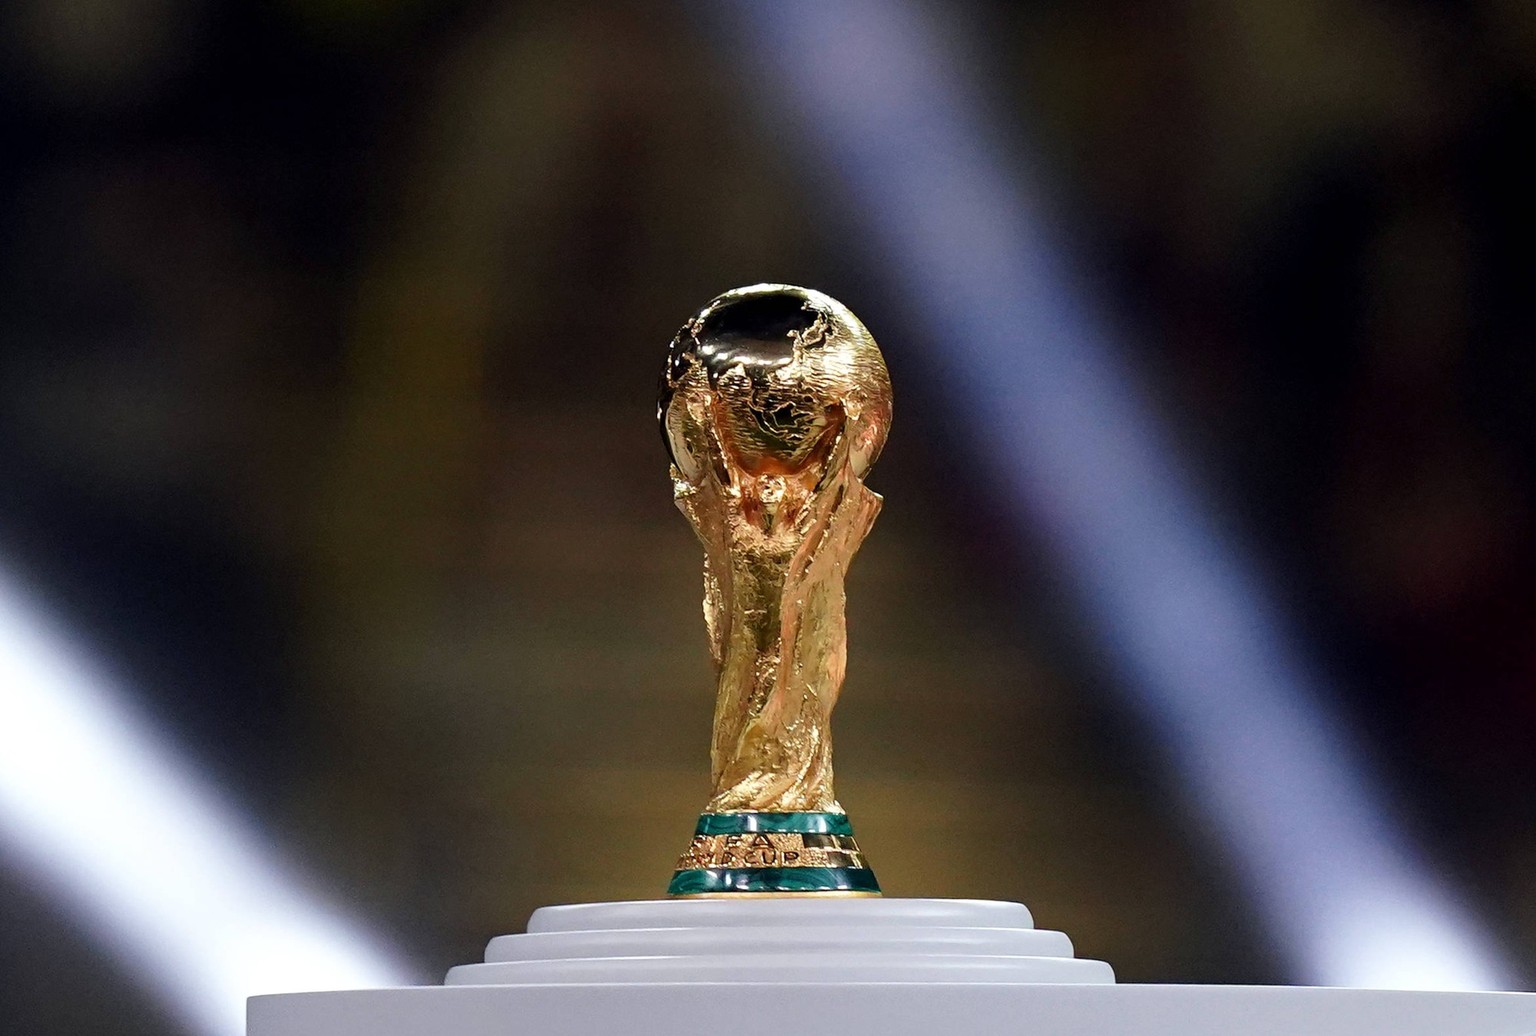 FIFA World Cup, WM, Weltmeisterschaft, Fussball File Photo File photo dated 18-12-2022 of A general view of the FIFA World Cup Trophy. Australia has opted against a bid to host the 2034 World Cup, lea ...